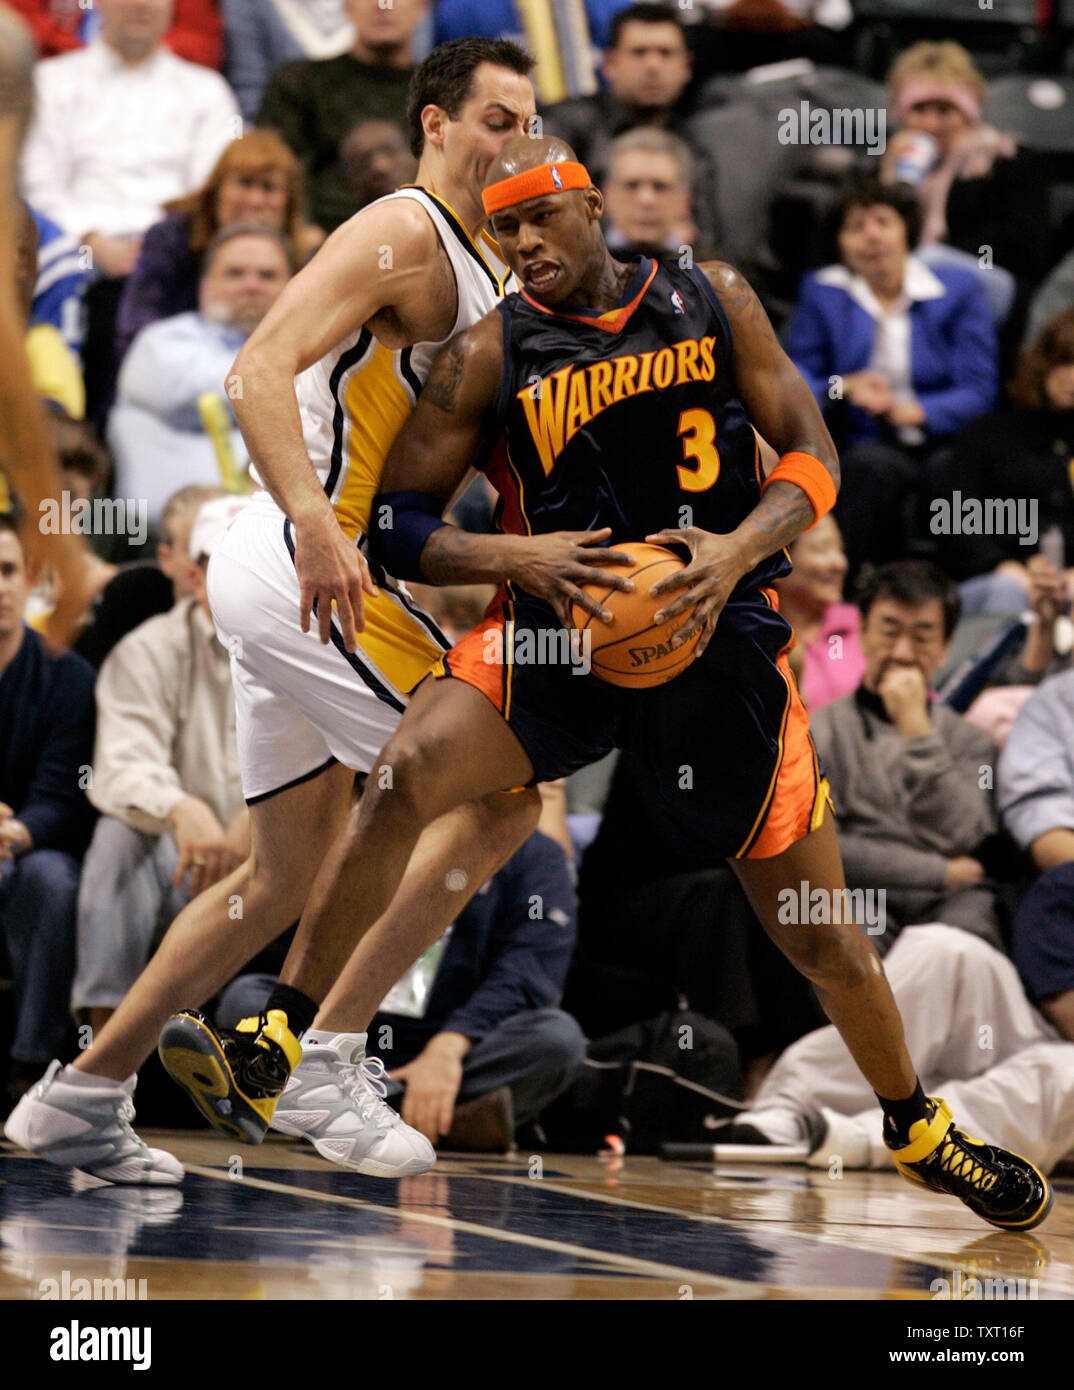 Golden State Warriors forward Al Harrington (3) drives around Indiana Pacers center Jeff Foster (10) at Conseco Fieldhouse in Indianapolis February 5, 2007. Golden State defeated the Pacers 113-98. (UPI Photo/Mark Cowan) Stock Photo